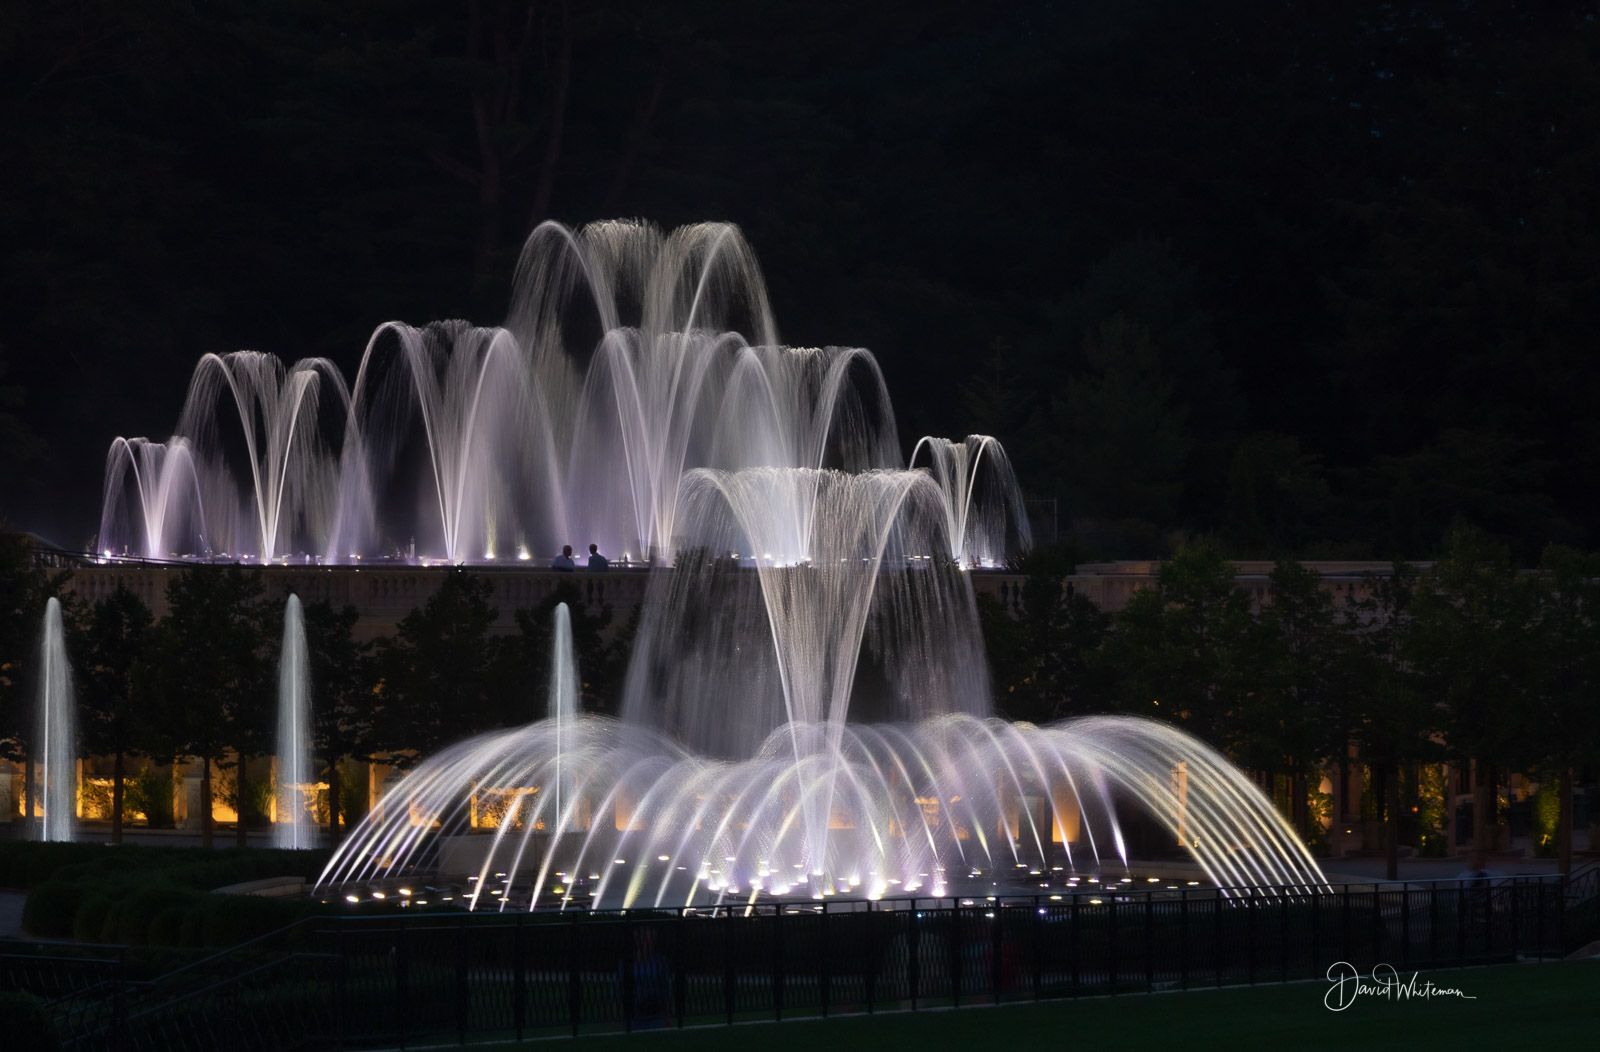 The Longwood Fountains